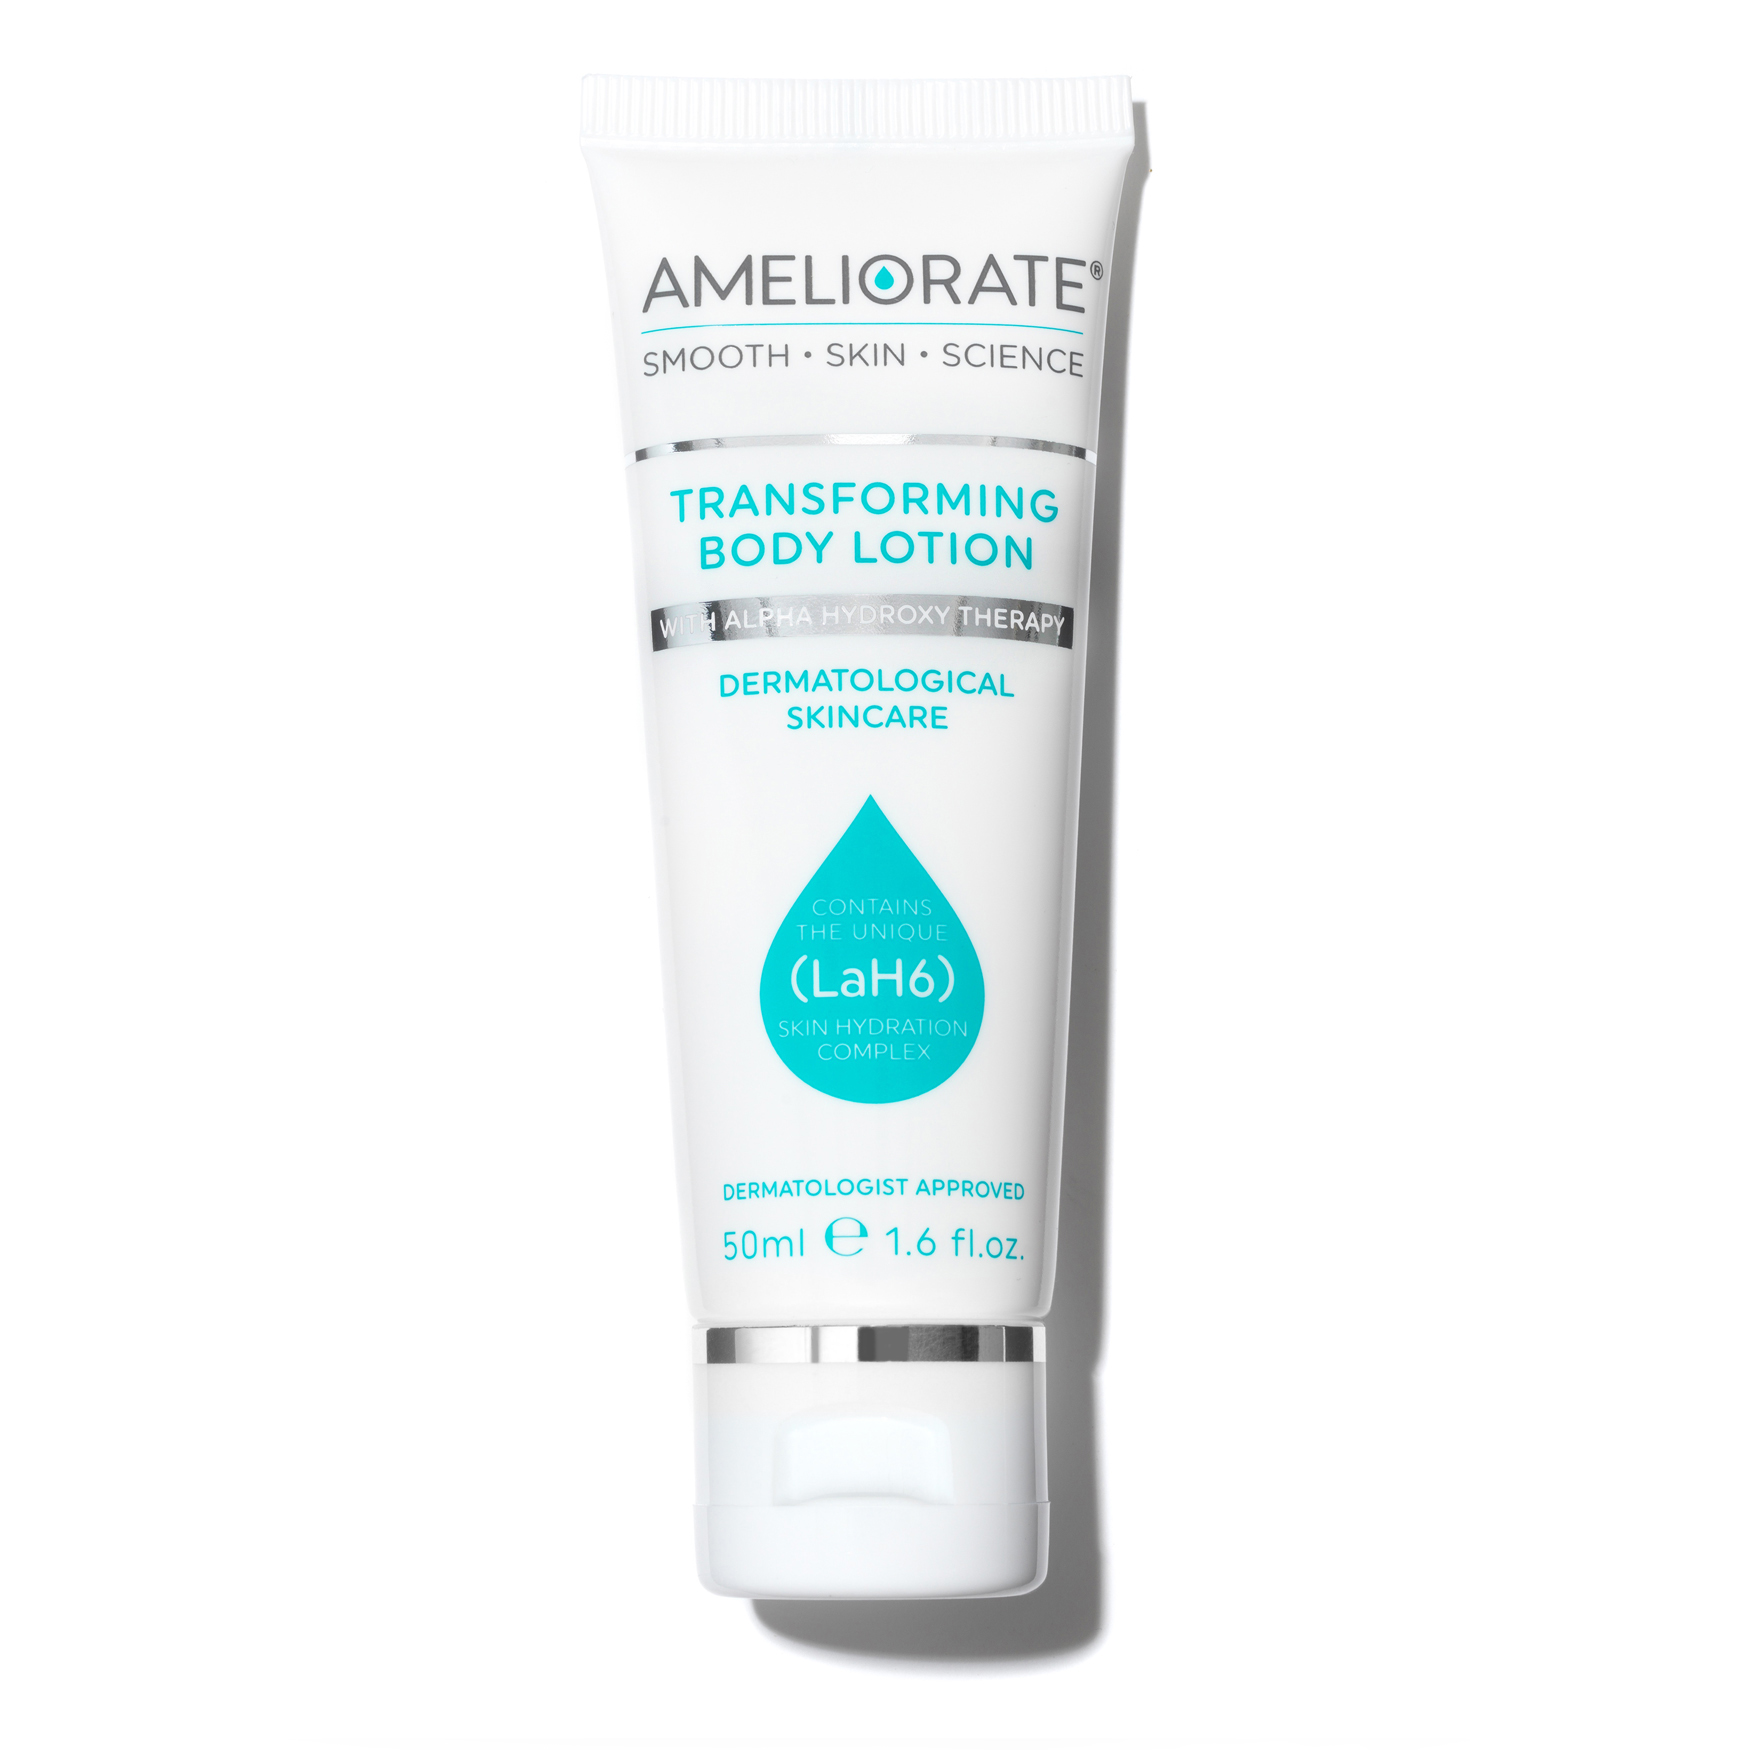 Ameliorate Transforming Body Lotion | Space NK